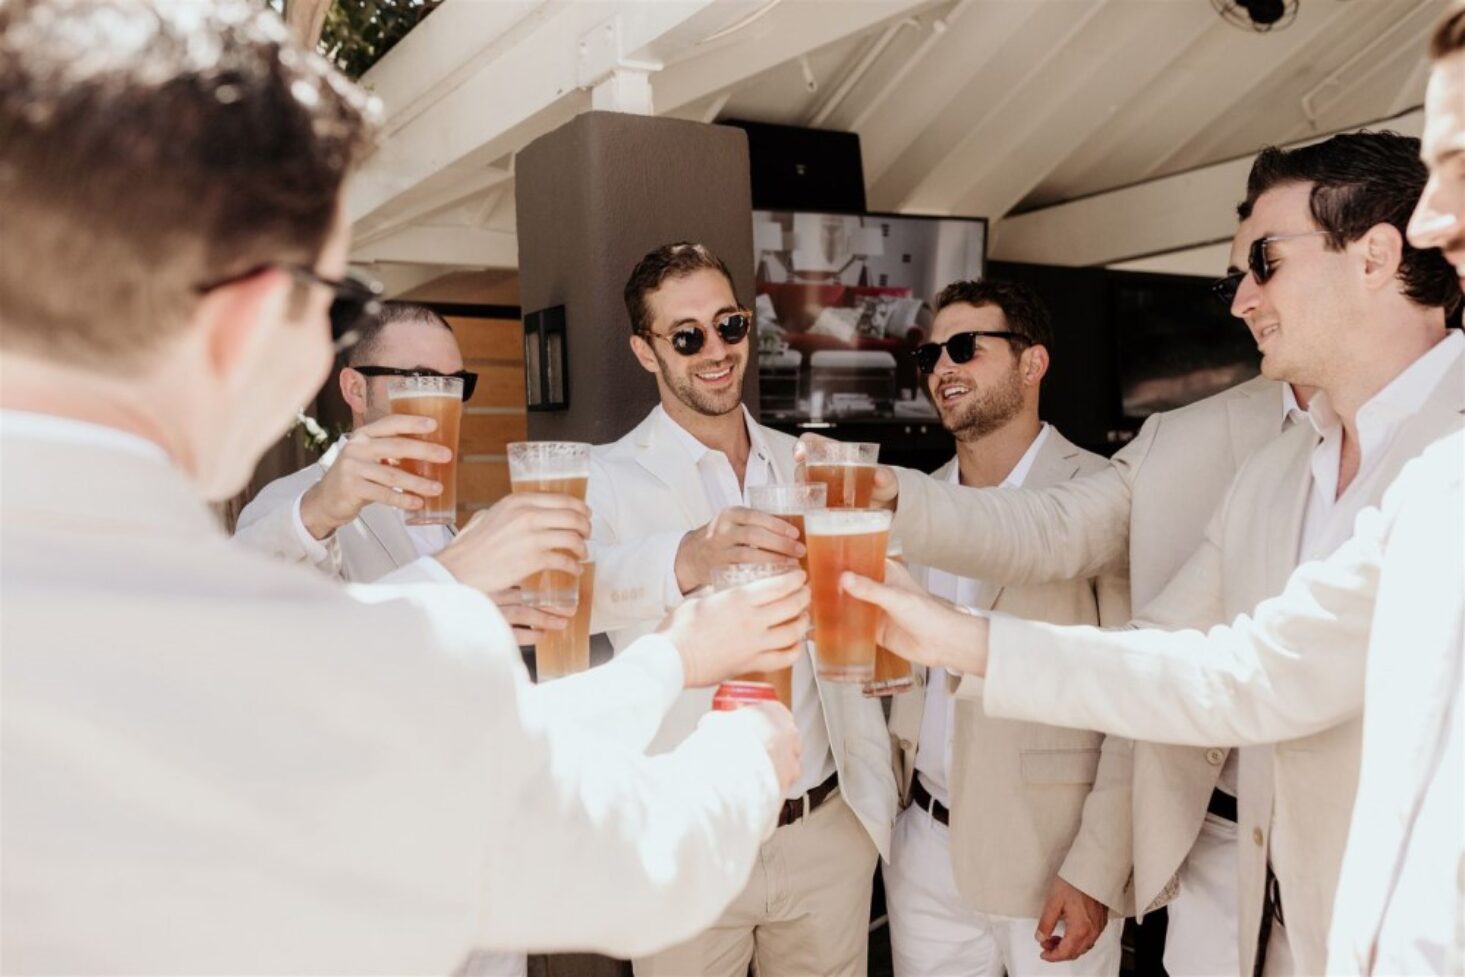 How to Plan a Stag Do That Everyone Will Enjoy